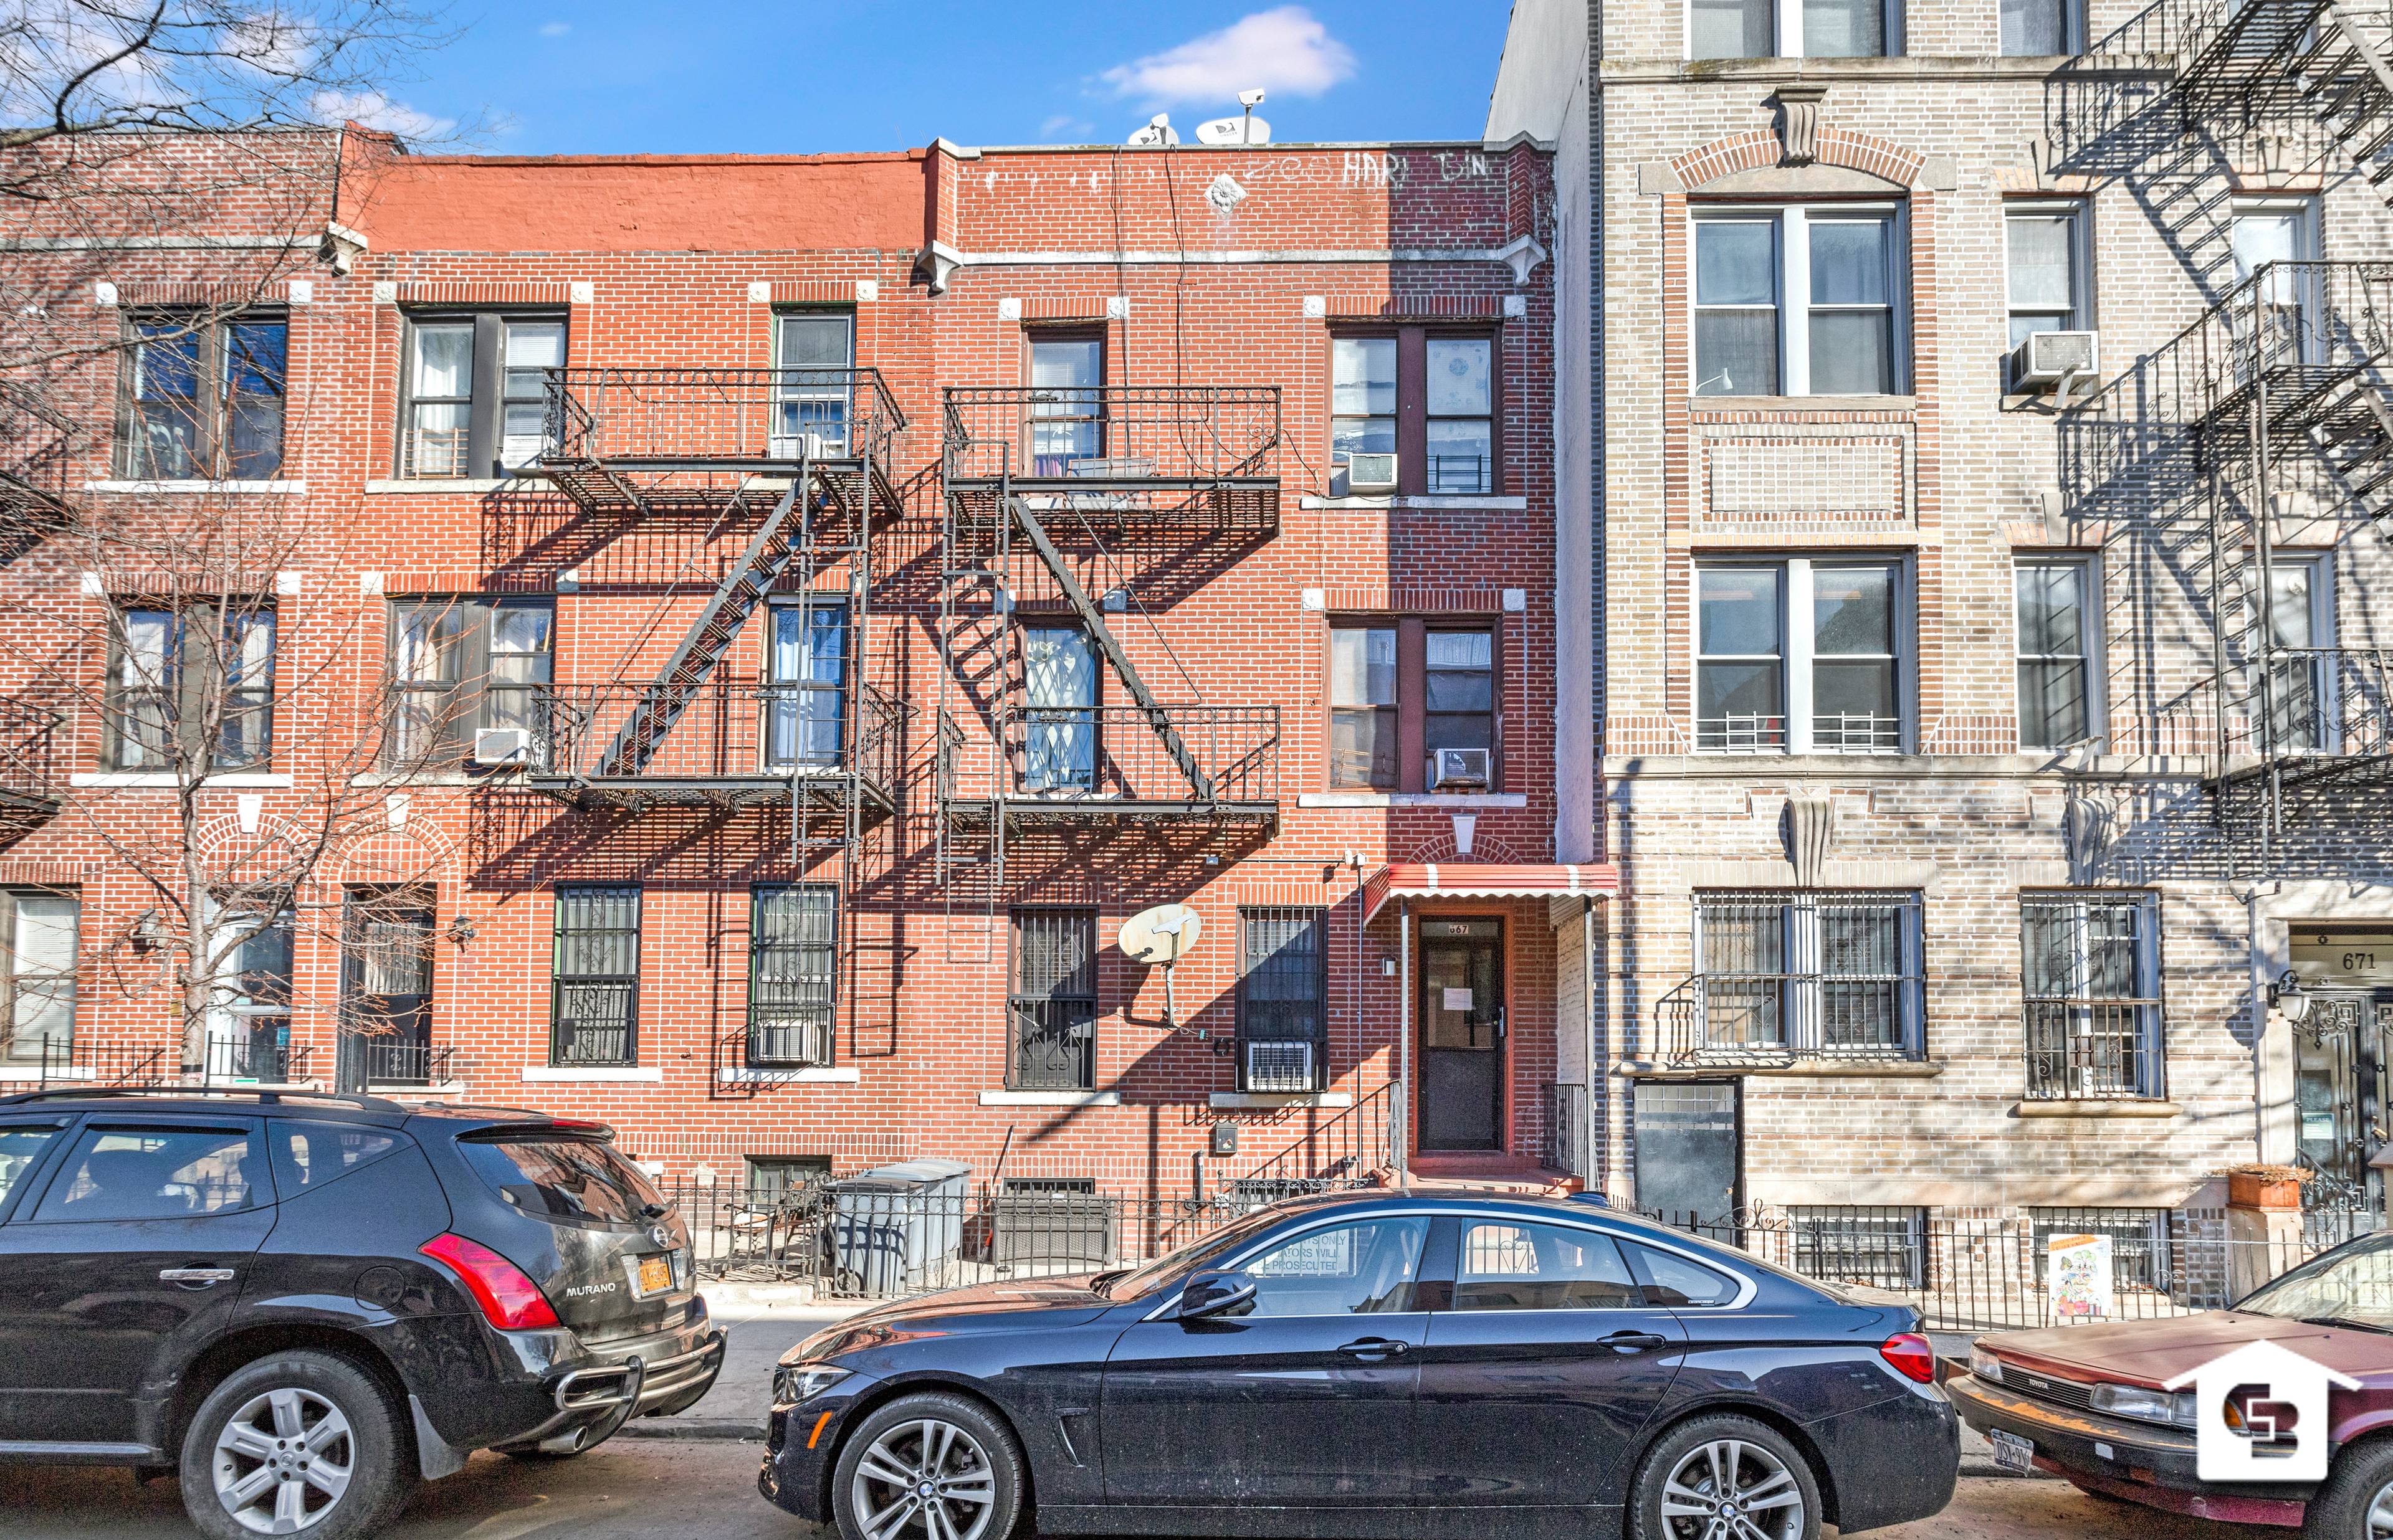 We are pleased to offer for sale 667 47th Street in the Sunset Park area of Brooklyn.